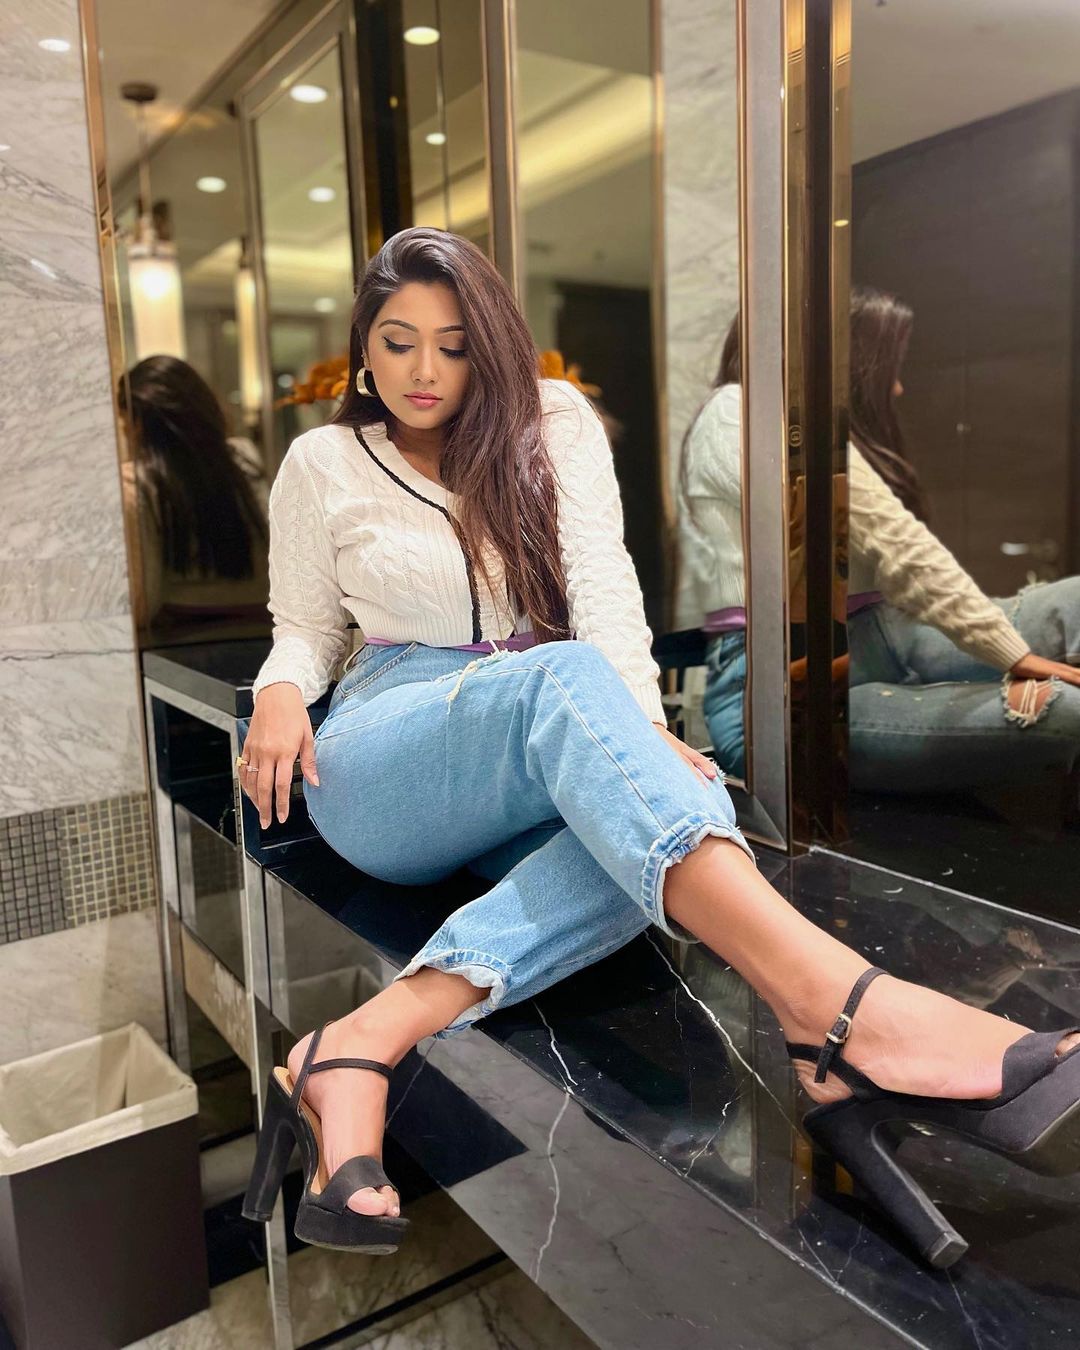 Agnijita Banerjee looking down and sitting on a black slab wearing a white sweater, blue jeans and black heels with her legs crossed and her hands on her side